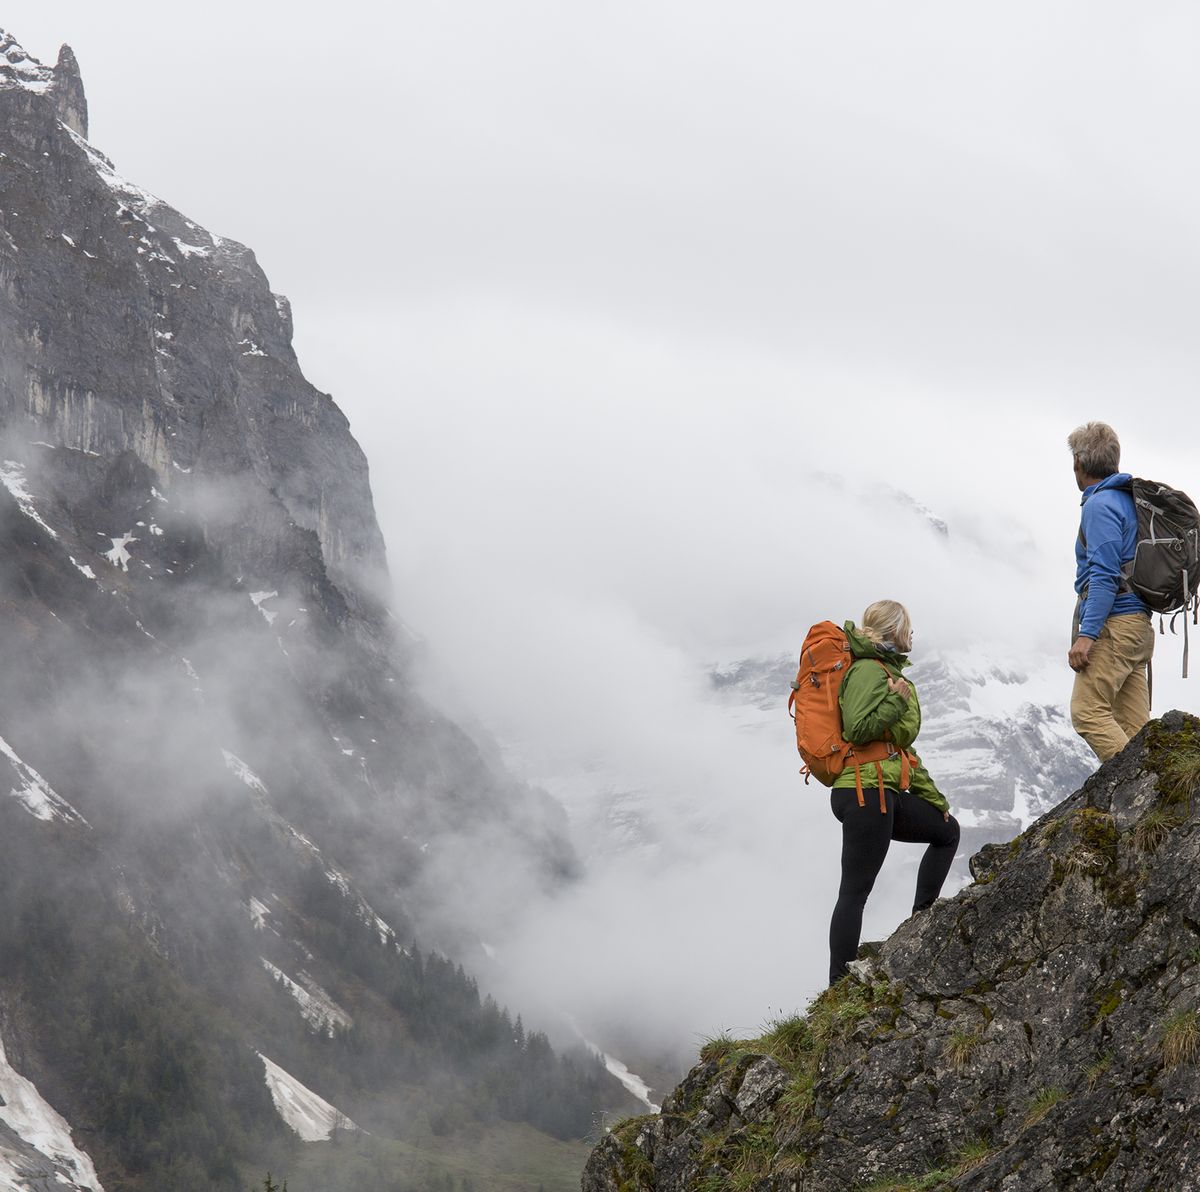 7 Sustainable Outdoor Clothing Brands For Eco Adventurers